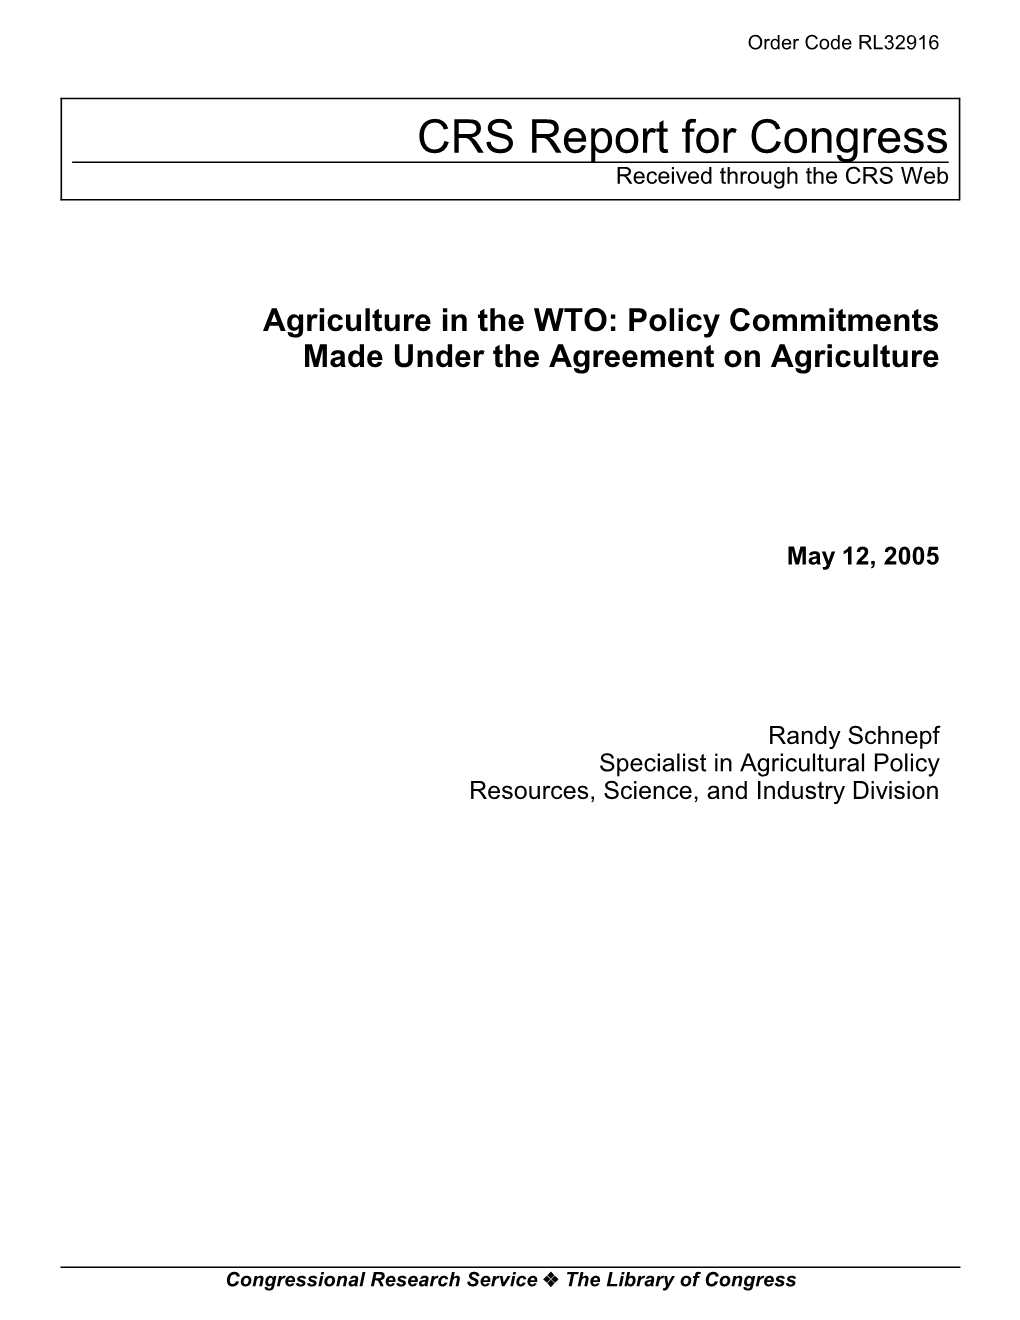 Policy Commitments Made Under the Agreement on Agriculture